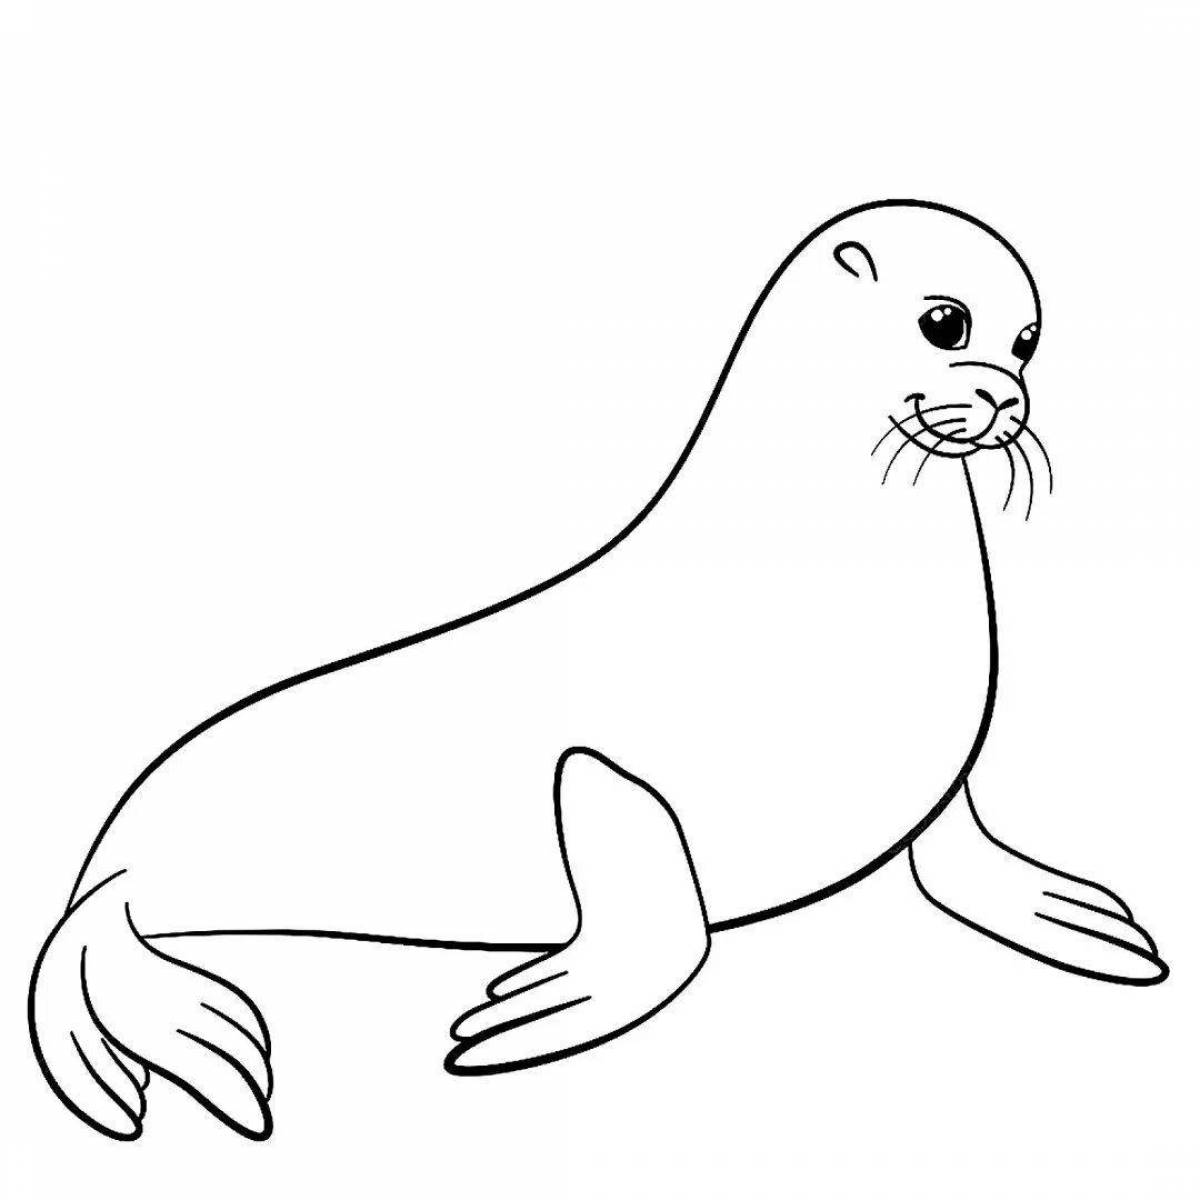 Colourful coloring of the Baikal seal for children